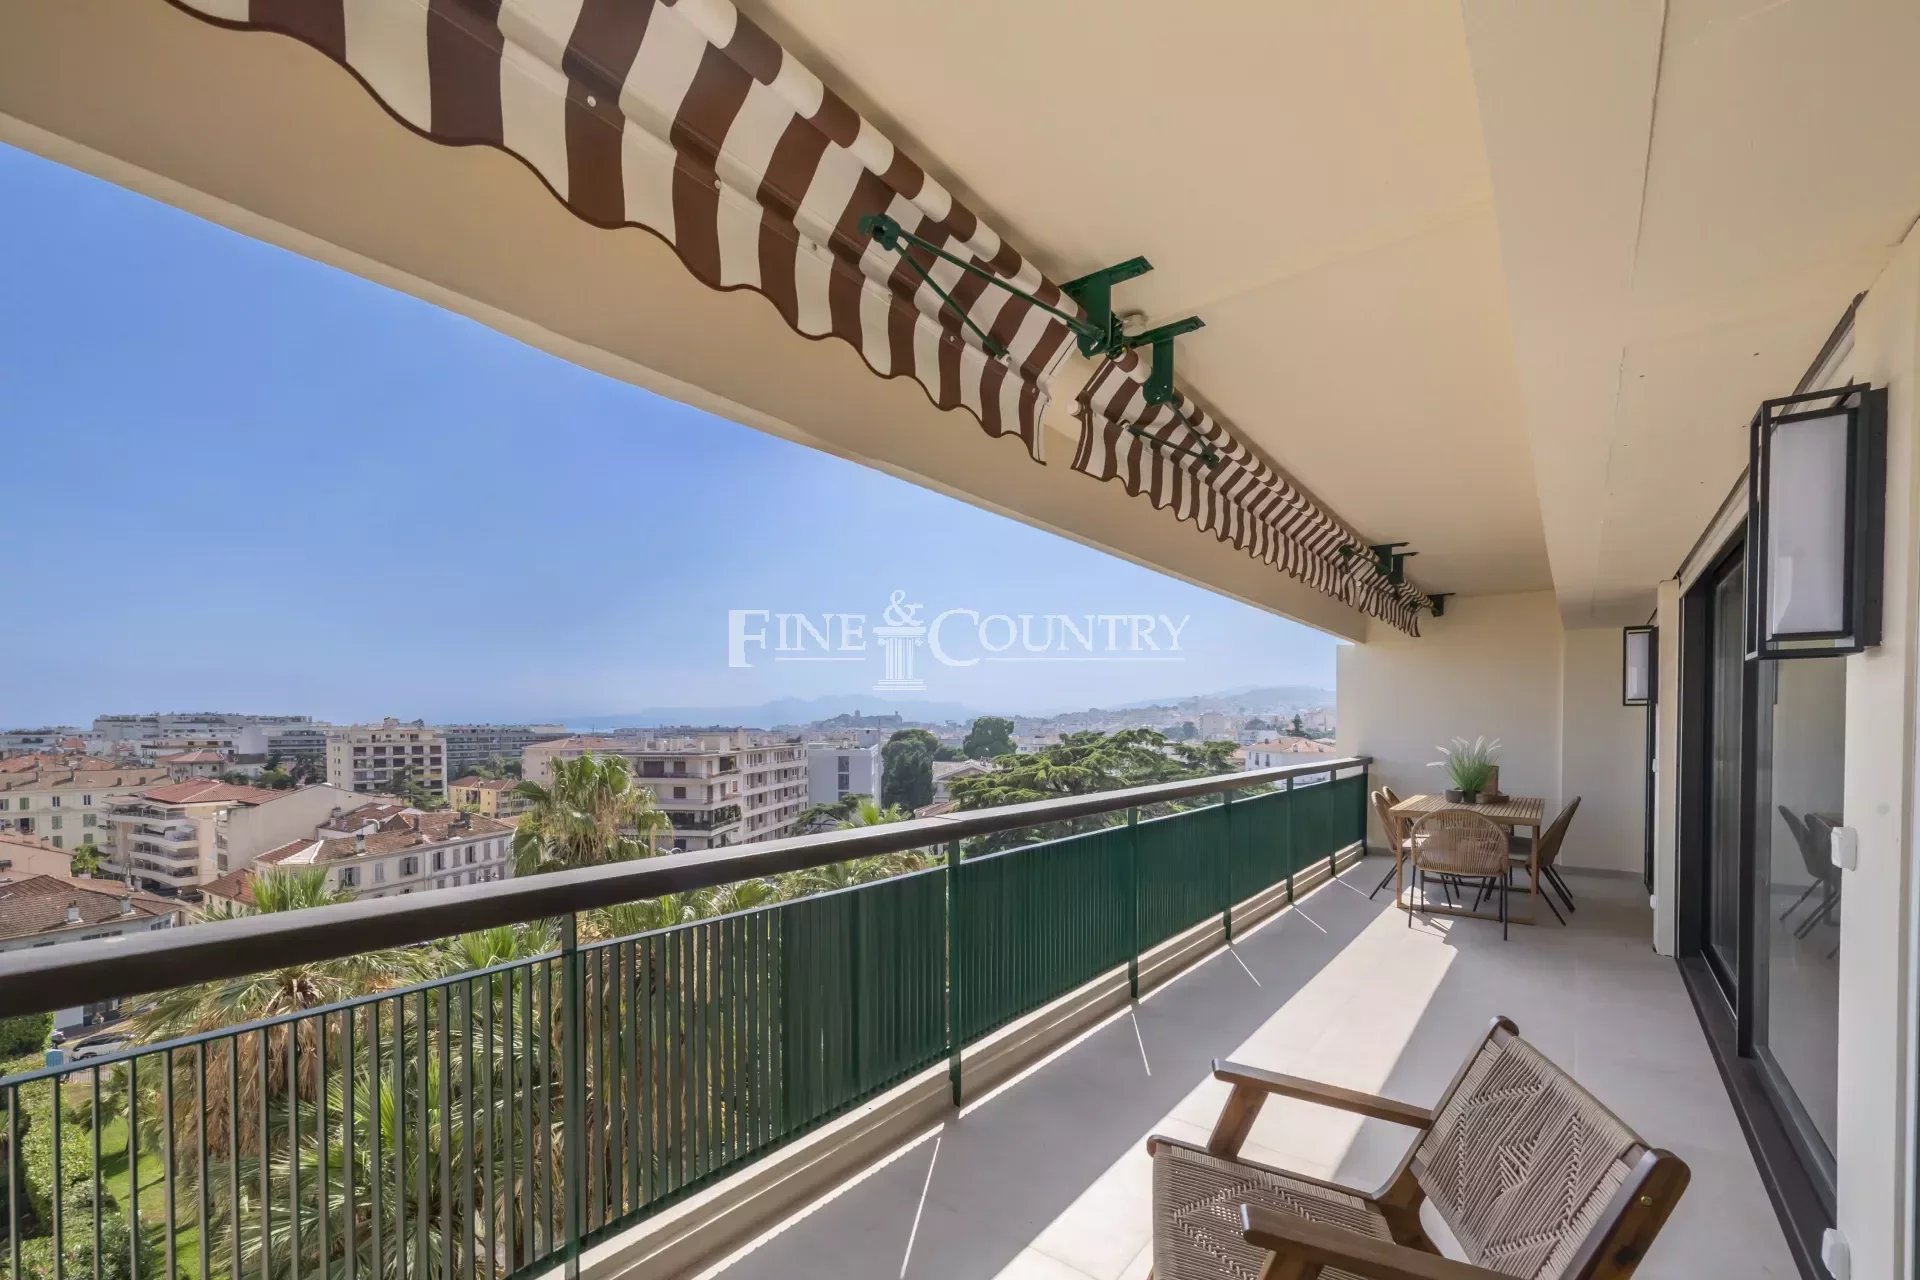 Luxury Apartment for sale in Cannes with panoramic views